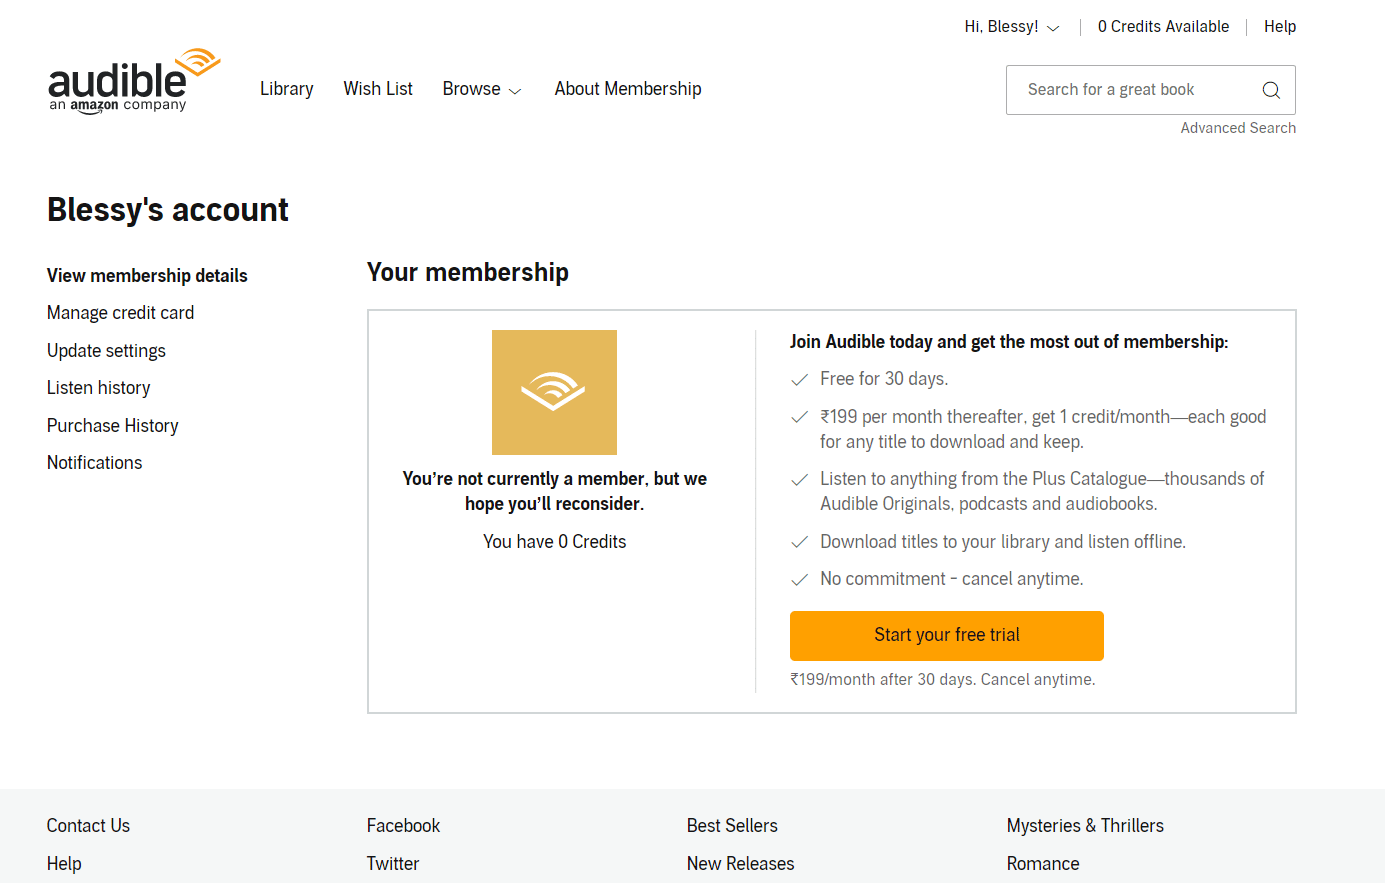 You can change your password, switch or cancel your membership